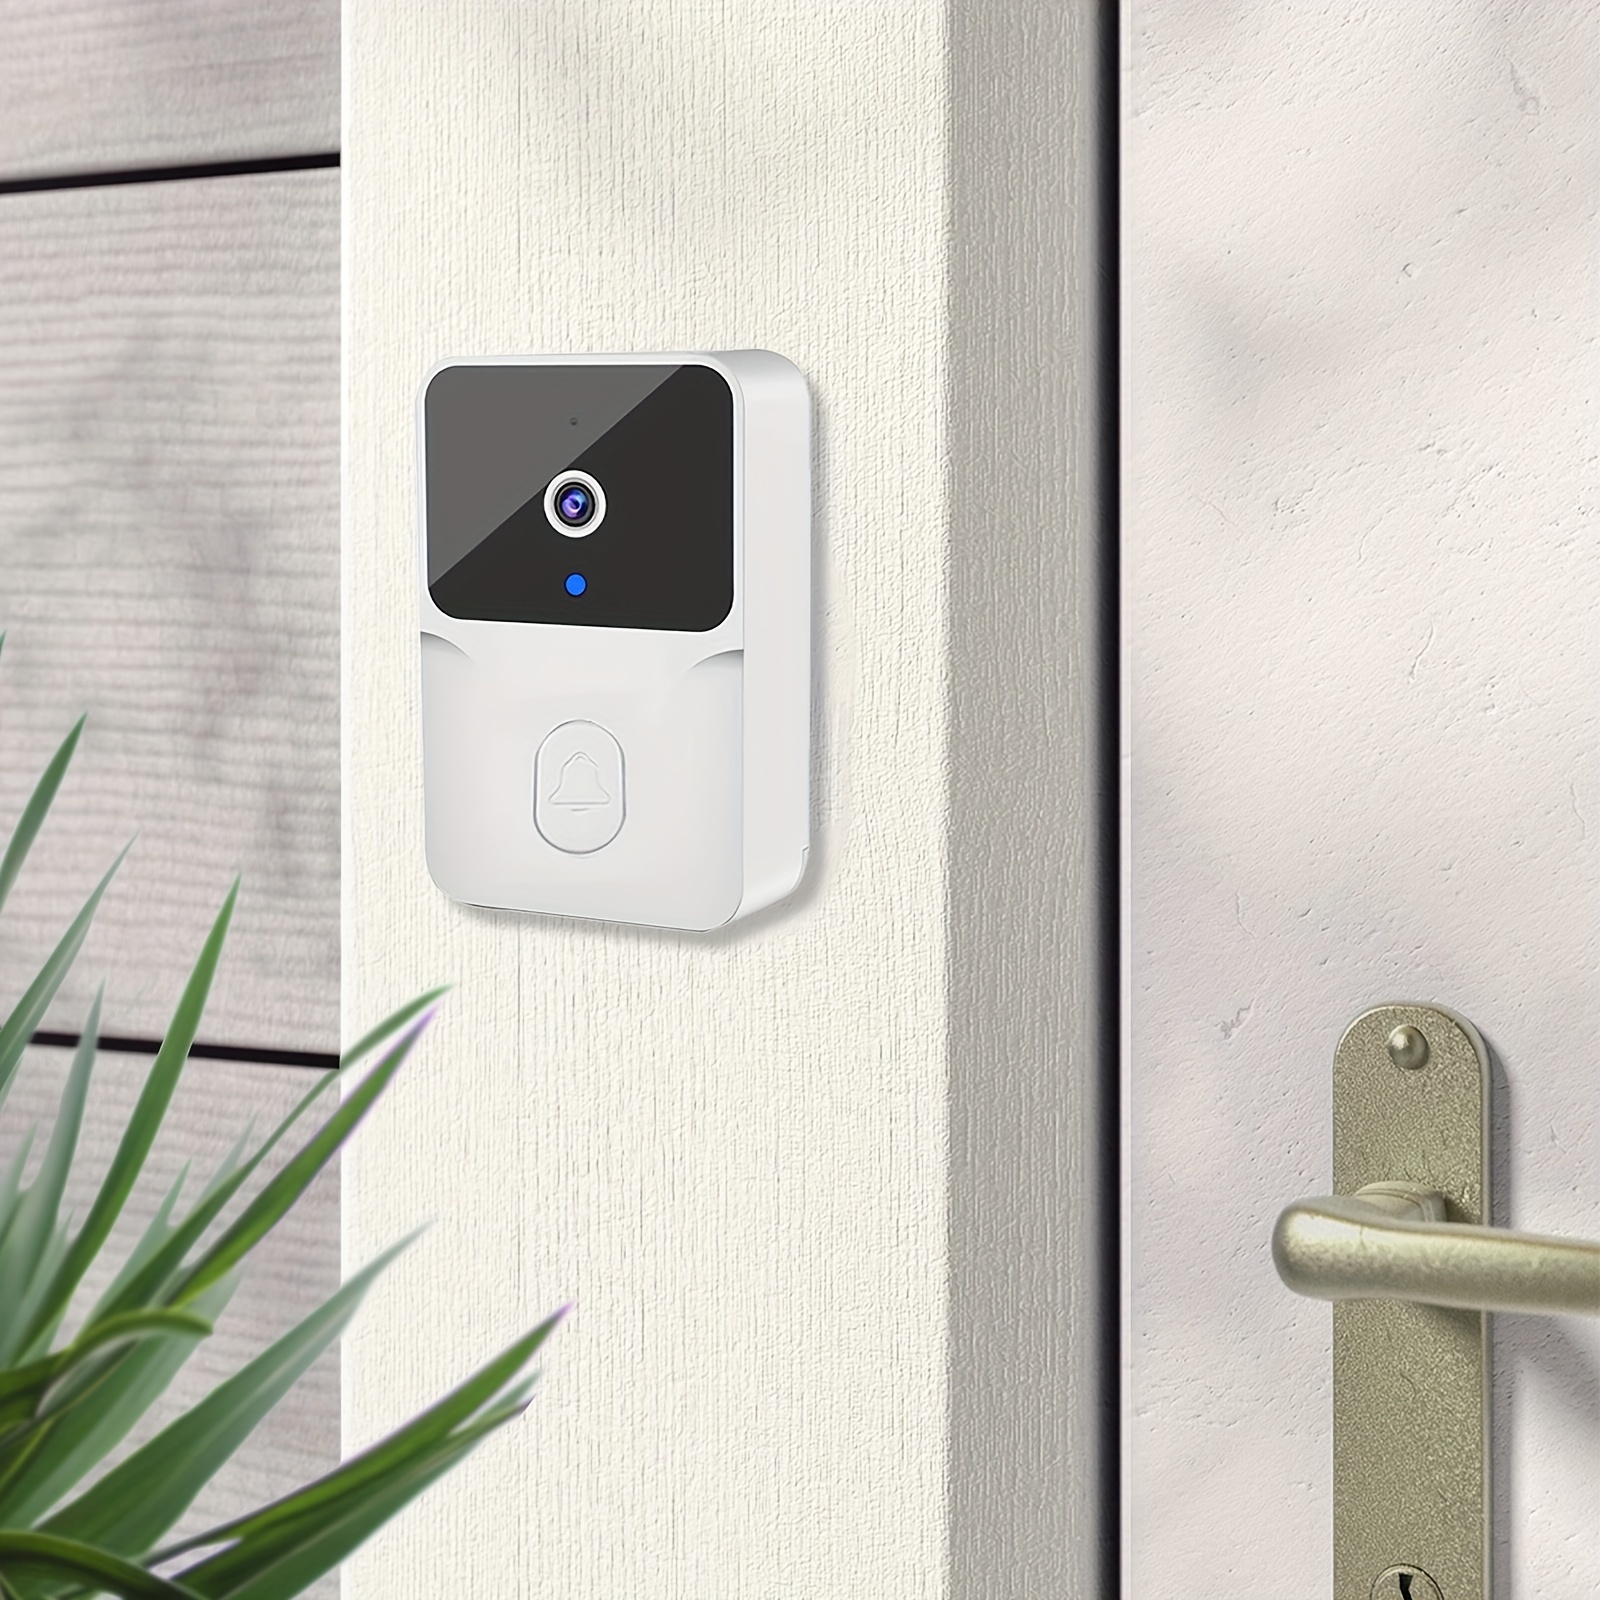 

Smart Hd Wireless Doorbell Camera With Night Vision, Two-way Audio, App Control & Rechargeable Battery